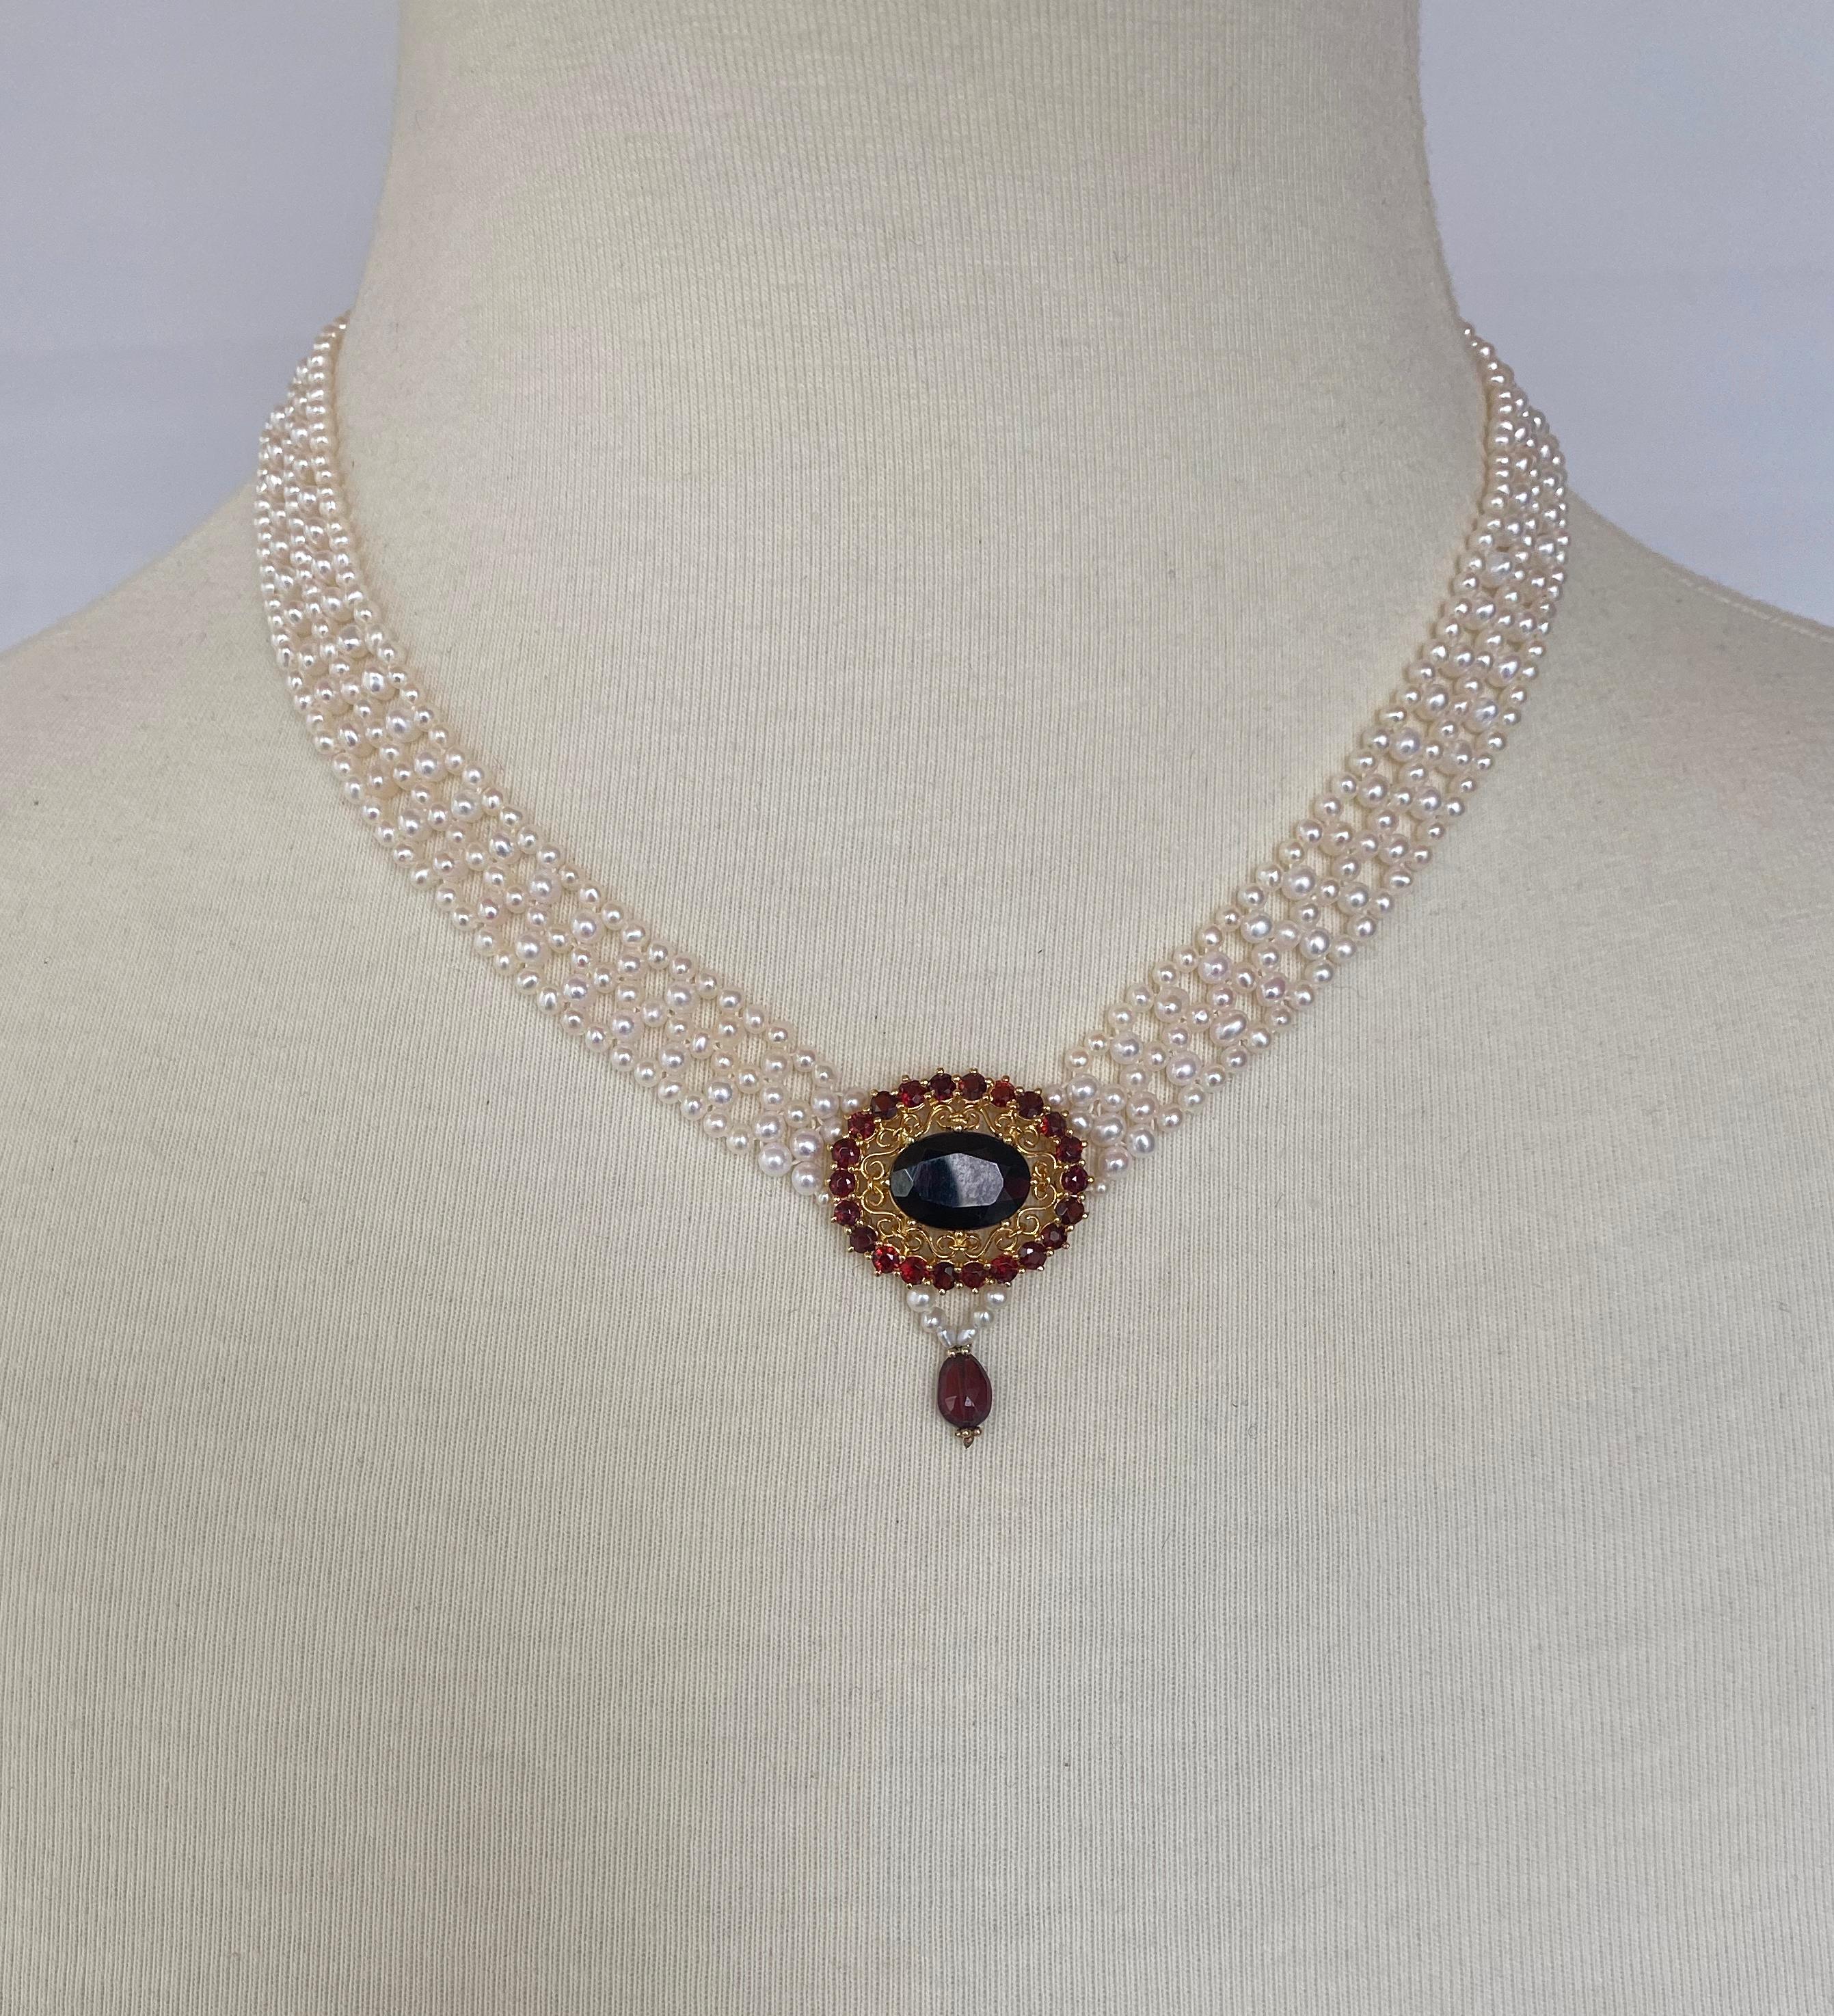 Bead Marina J. Pearl Woven Necklace with Gold Plated Vintage Garnet Brooch